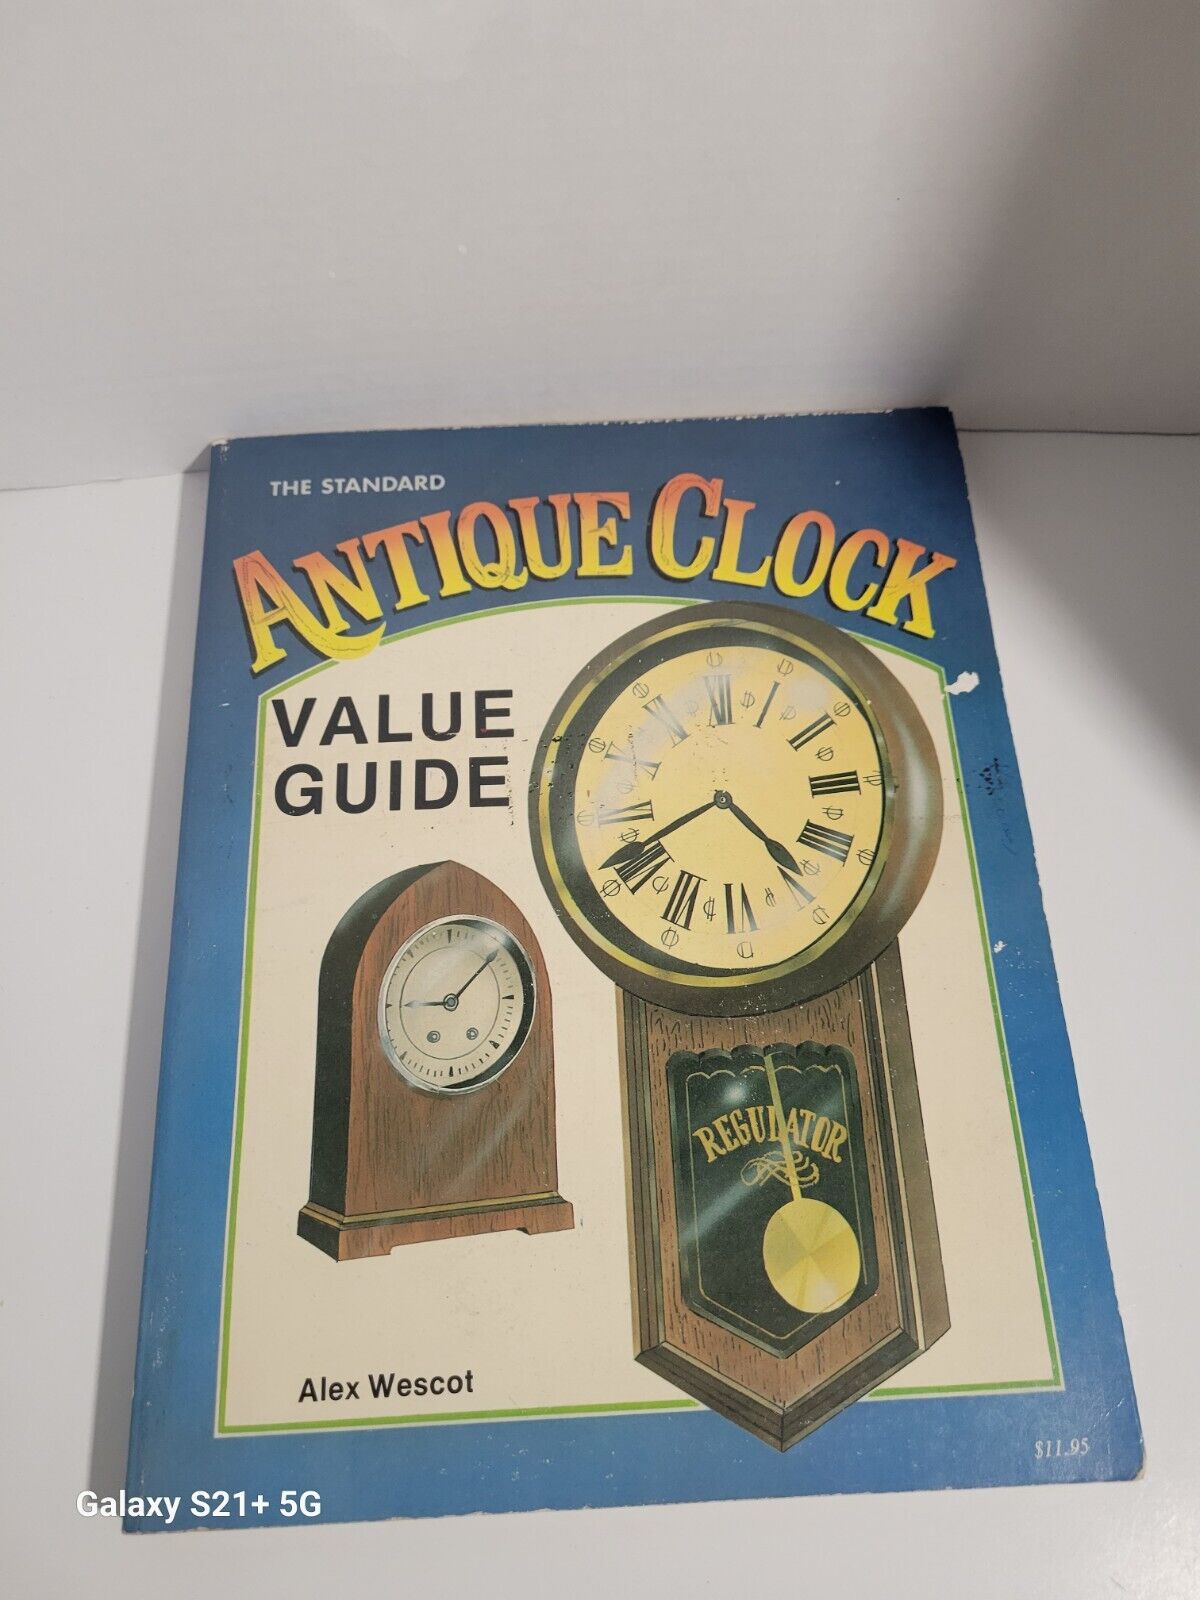 The Standard Antique Clock Value Guide by Alex Wescot